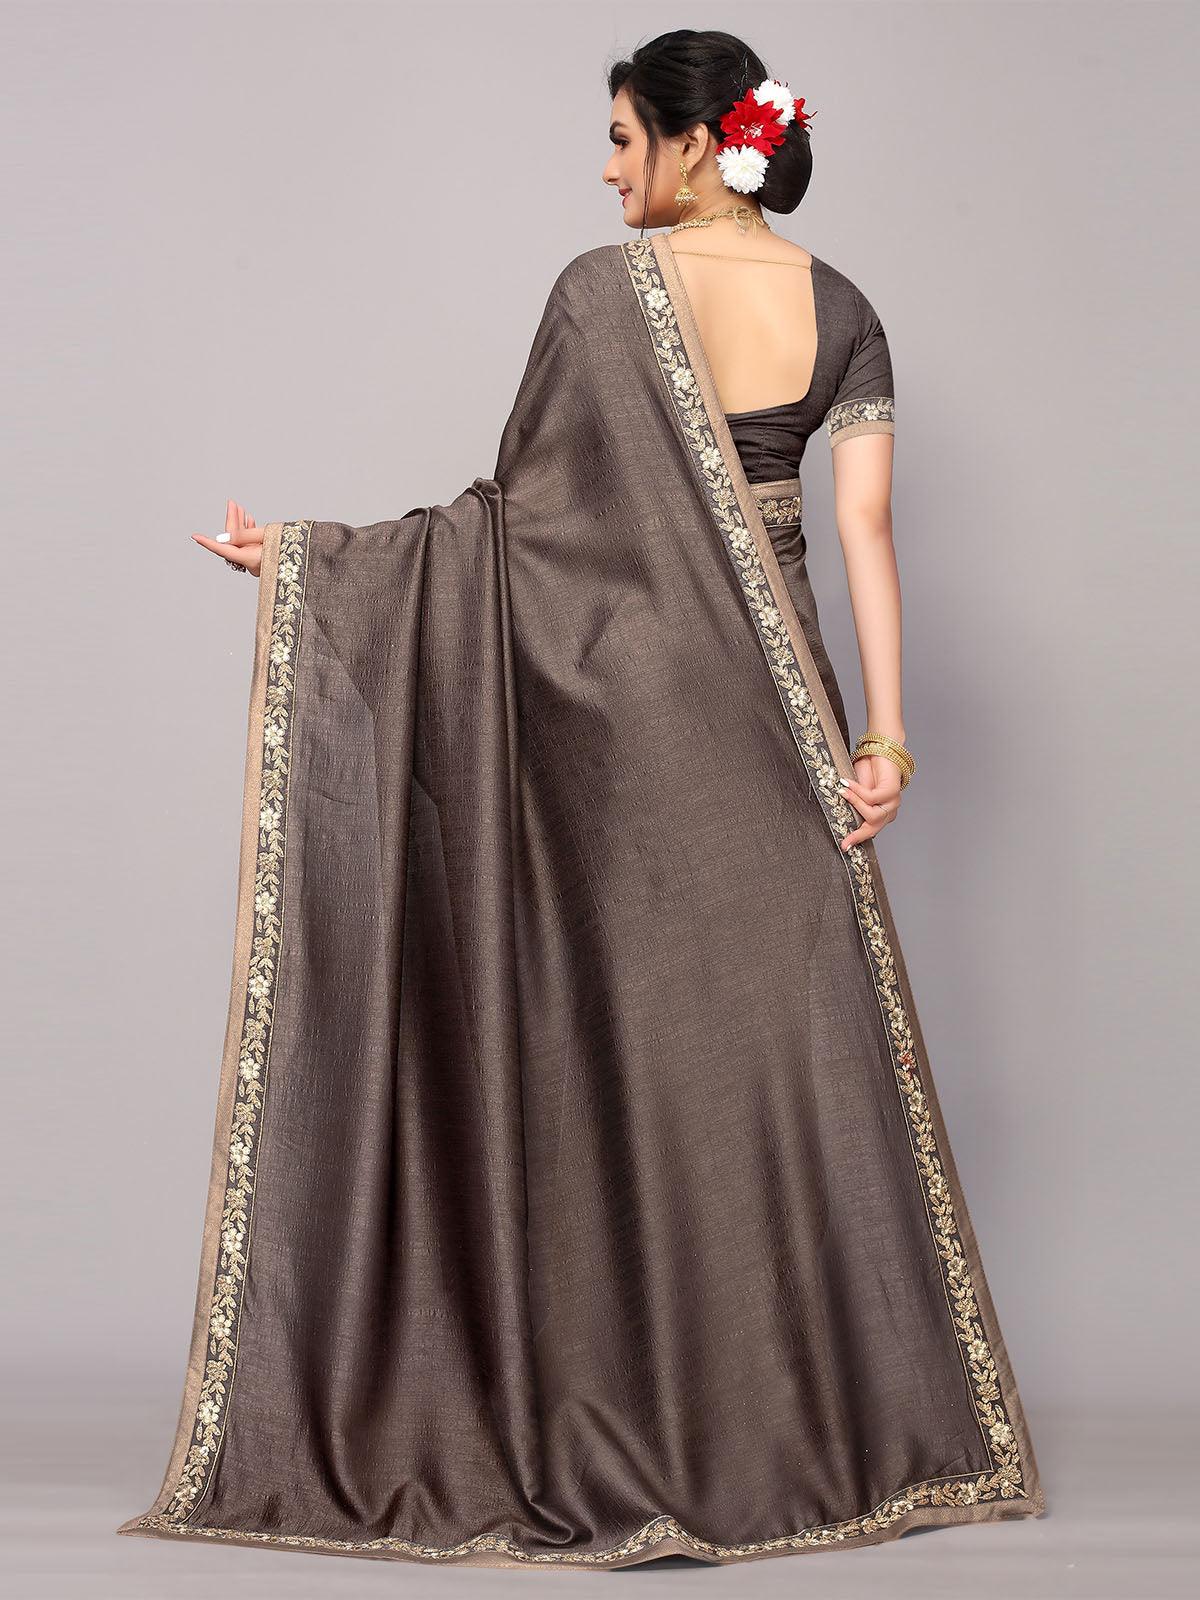 Women's Dusty Grey Poly Silk Embroidery Border Work Saree With Blouse - Odette